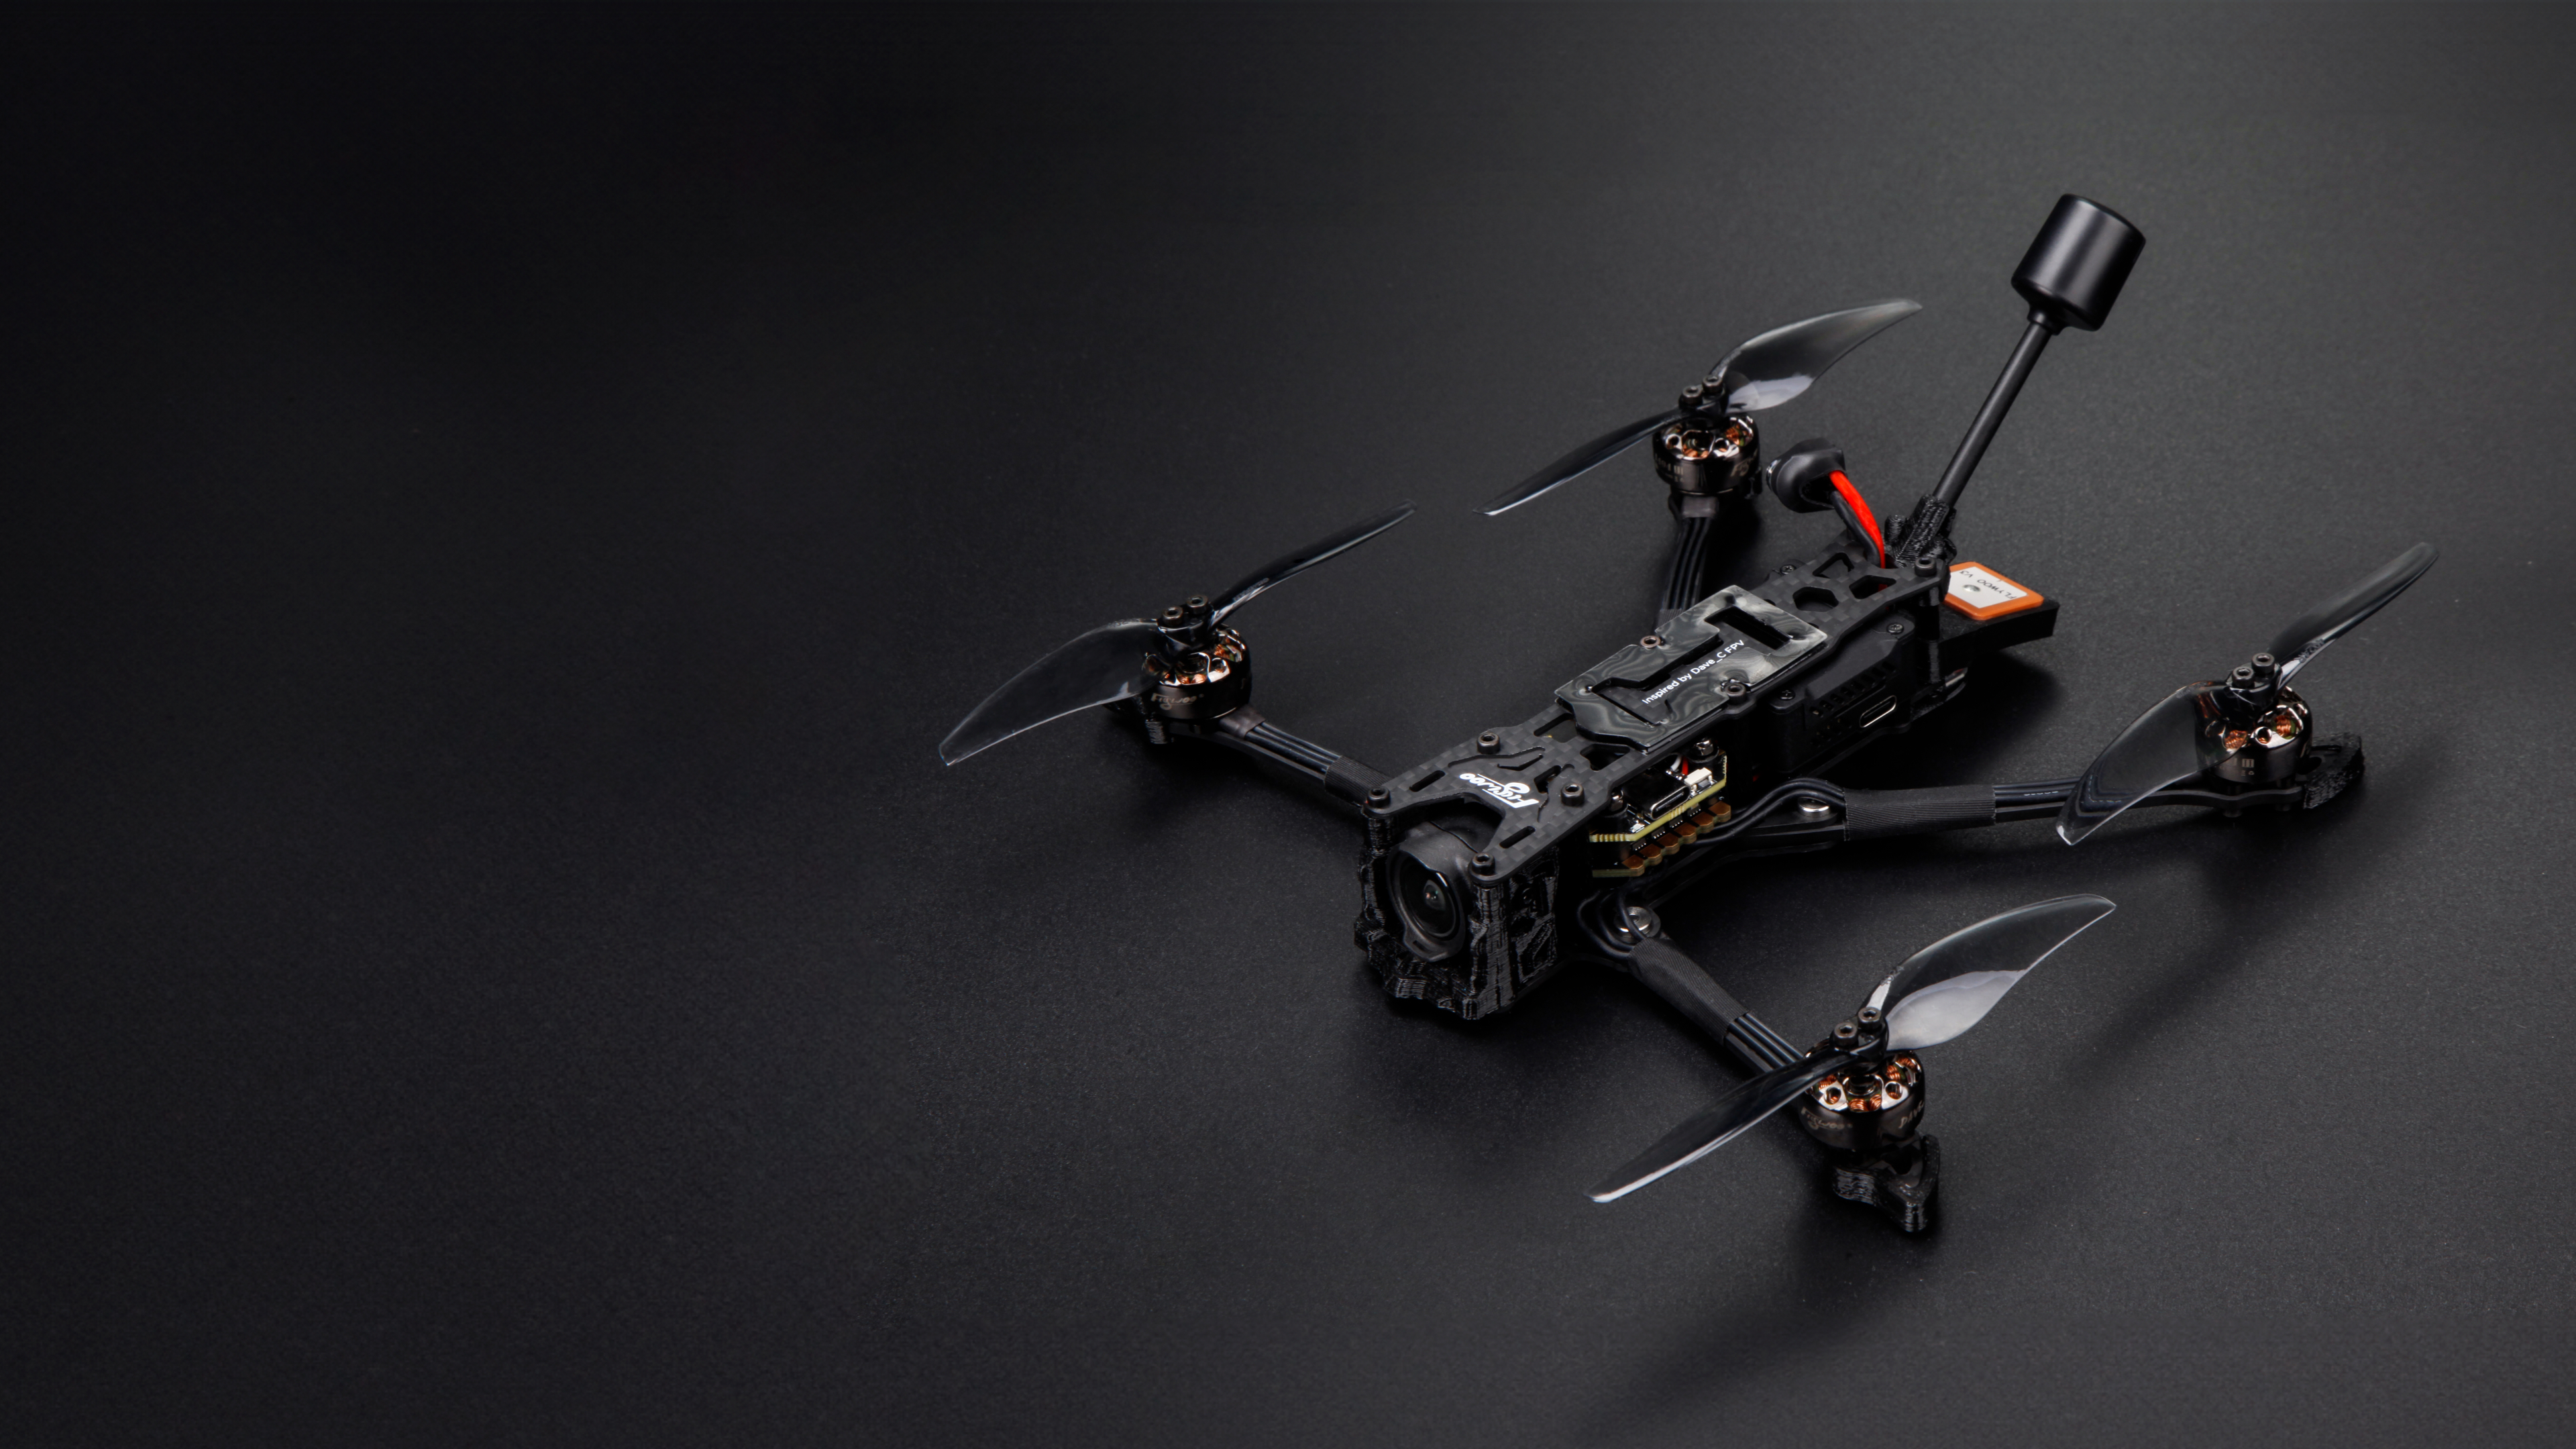 Shop Flywoo: Your Go-To for High-Quality Drones & Accessories